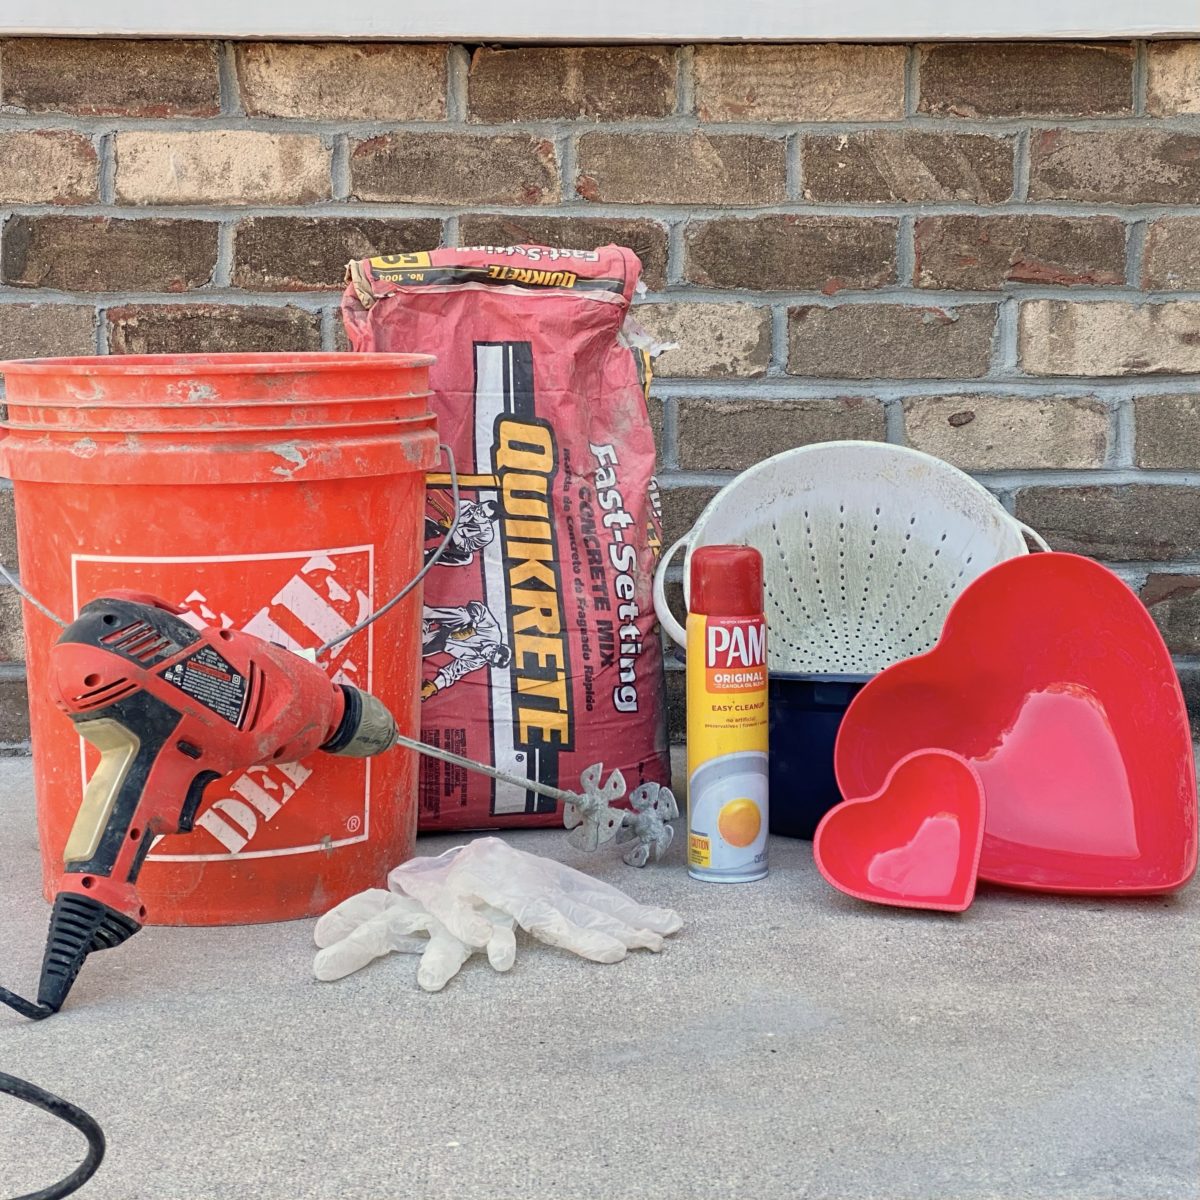 Materials needed to make DIY concrete heart dishes including quick-crete, a bucket, gloves, cooking spray, and heart shaped bowls.